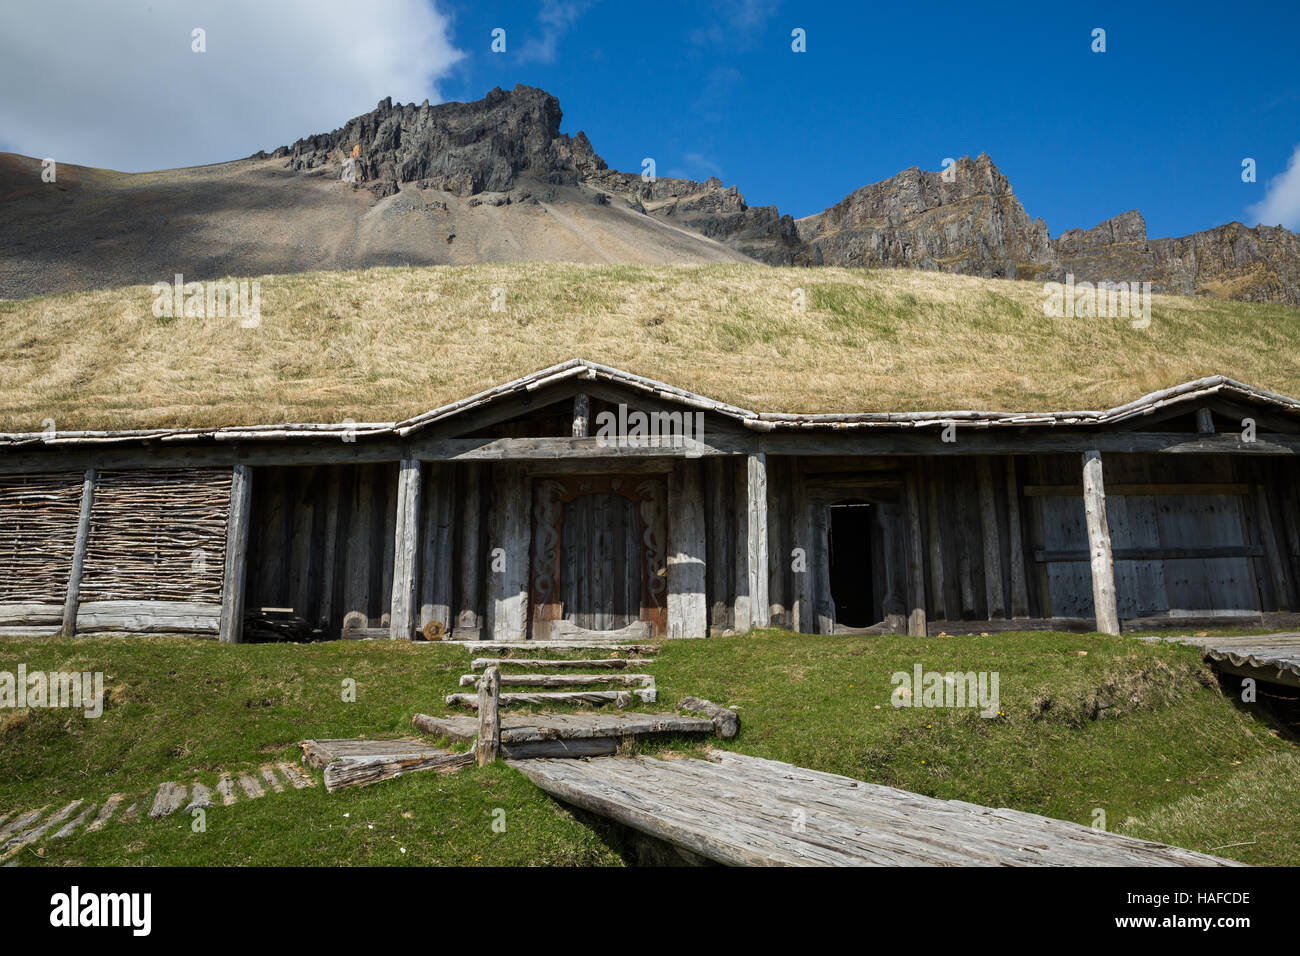 This long-house was created on an entire viking village film set for a production that was never filmed. Everthing about the village looks authentic a Stock Photo